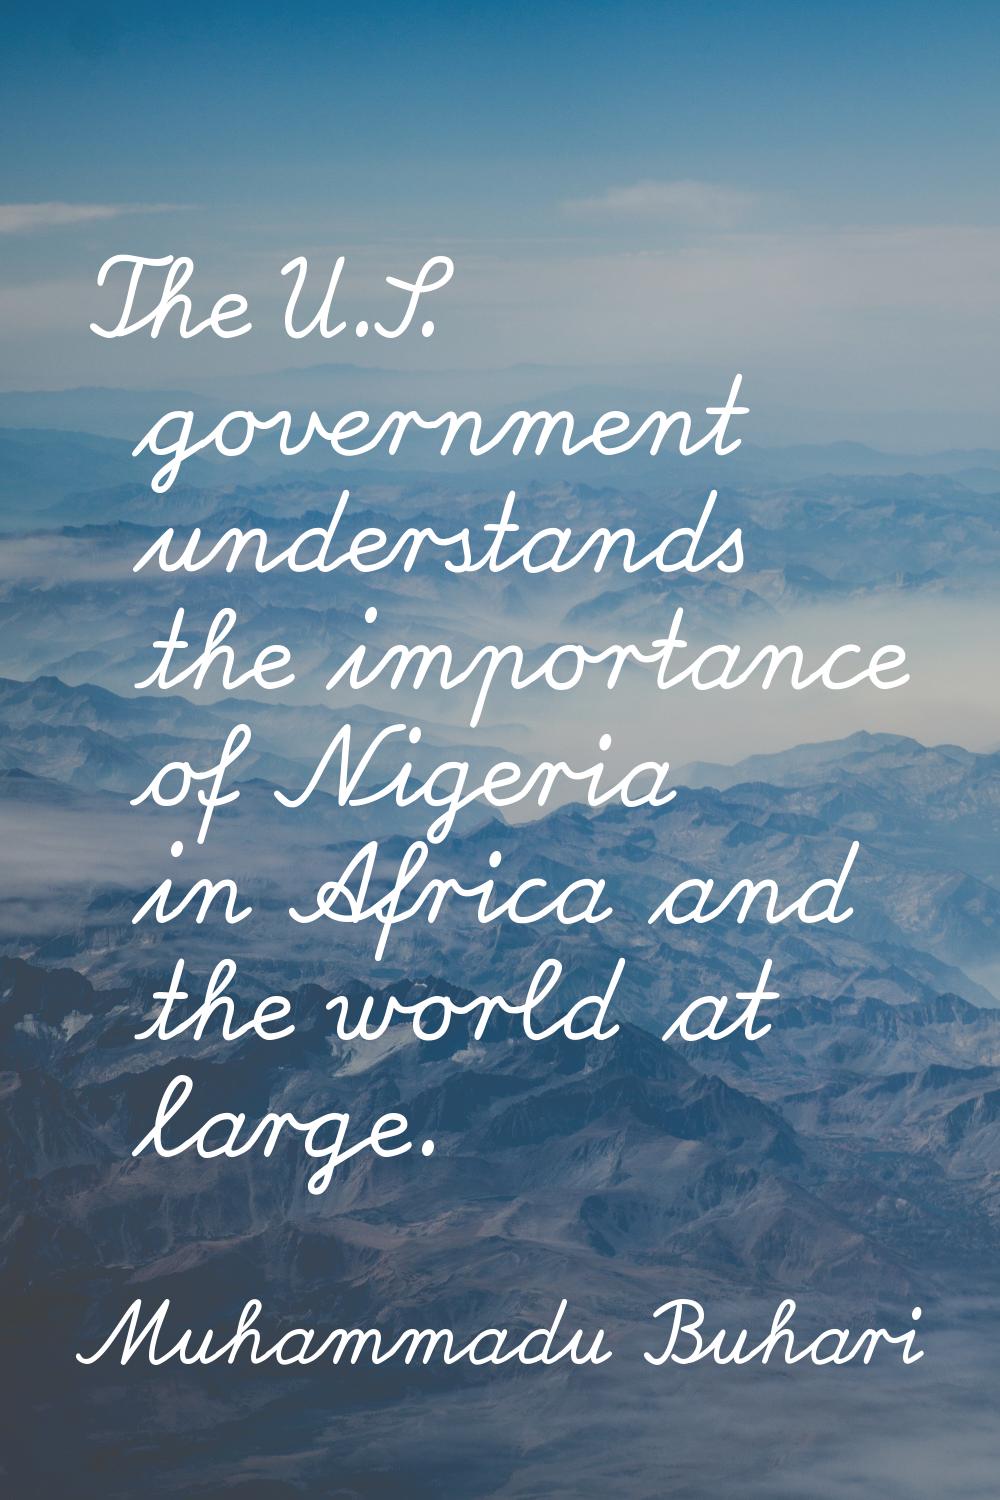 The U.S. government understands the importance of Nigeria in Africa and the world at large.